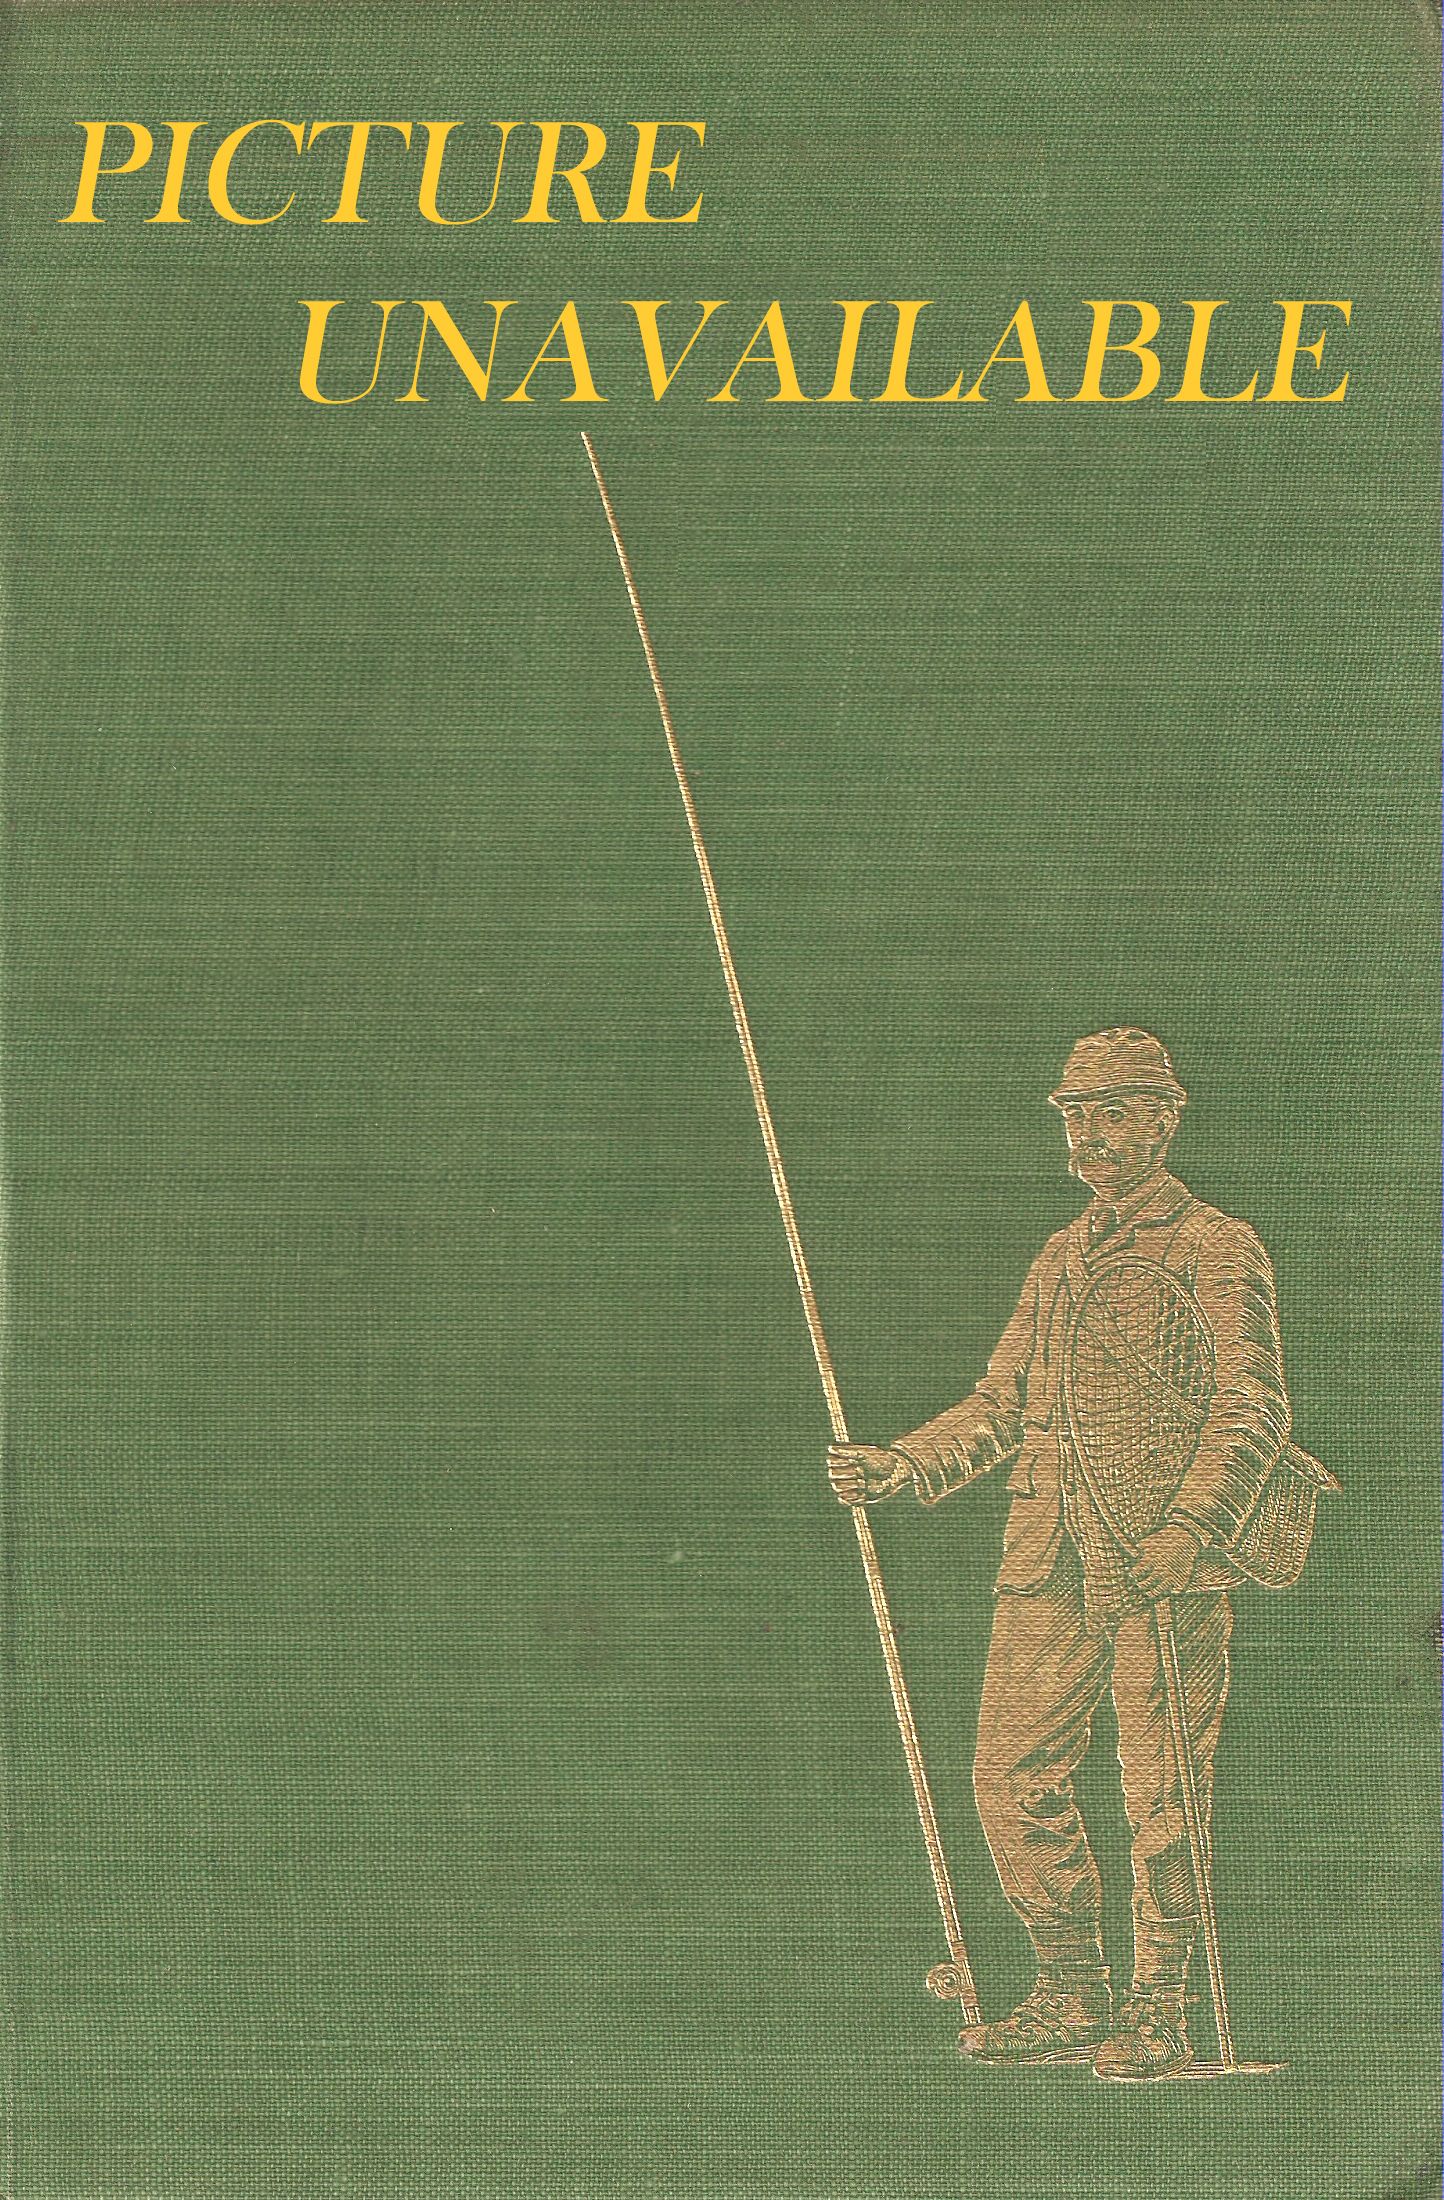 CREEL: A FISHING MAGAZINE. Volume 4, number 4. October 1966.